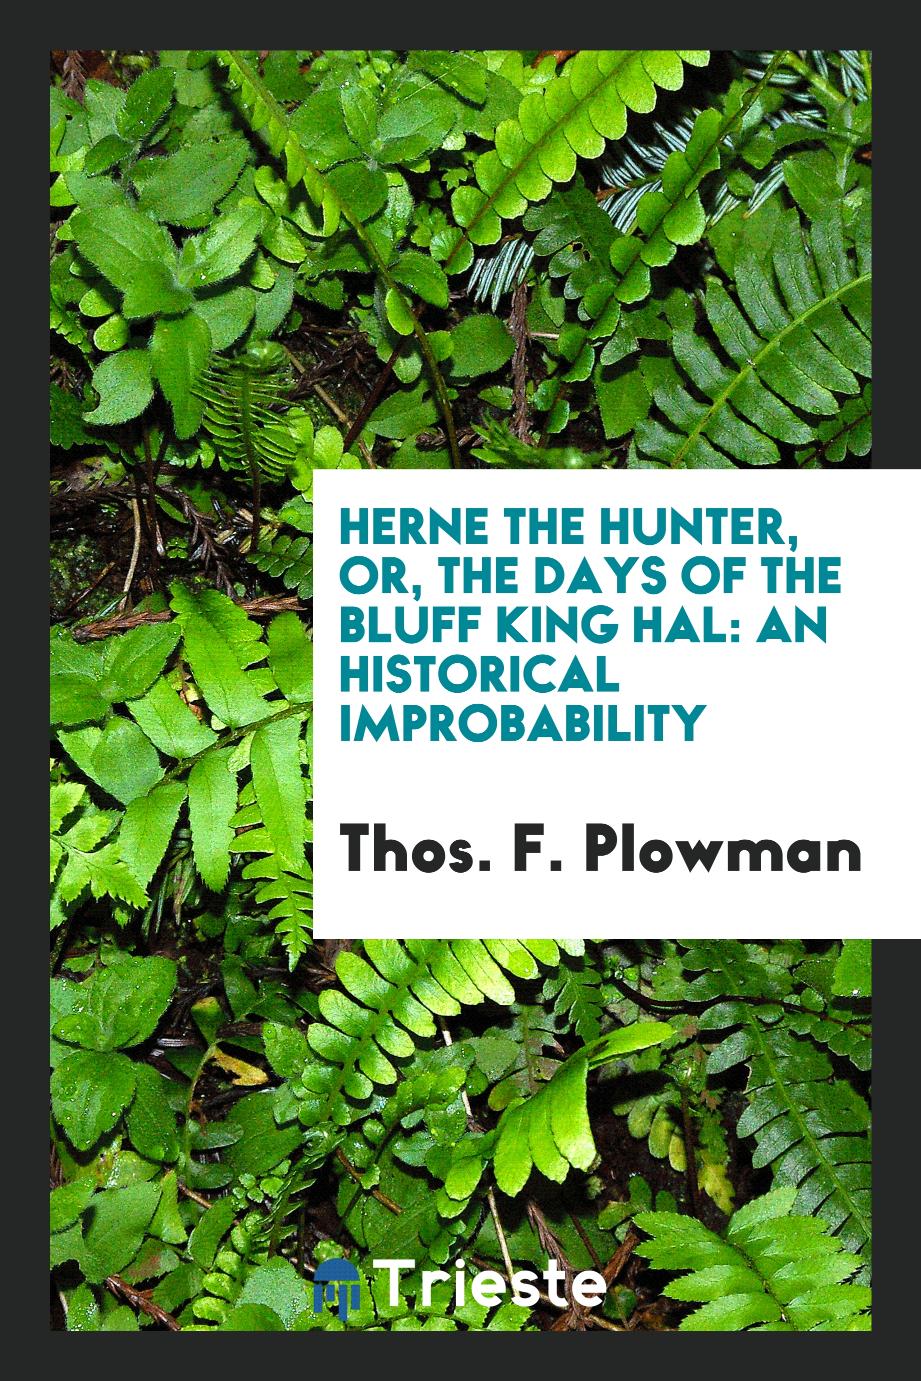 Herne the hunter, or, The days of the bluff king Hal: an historical improbability